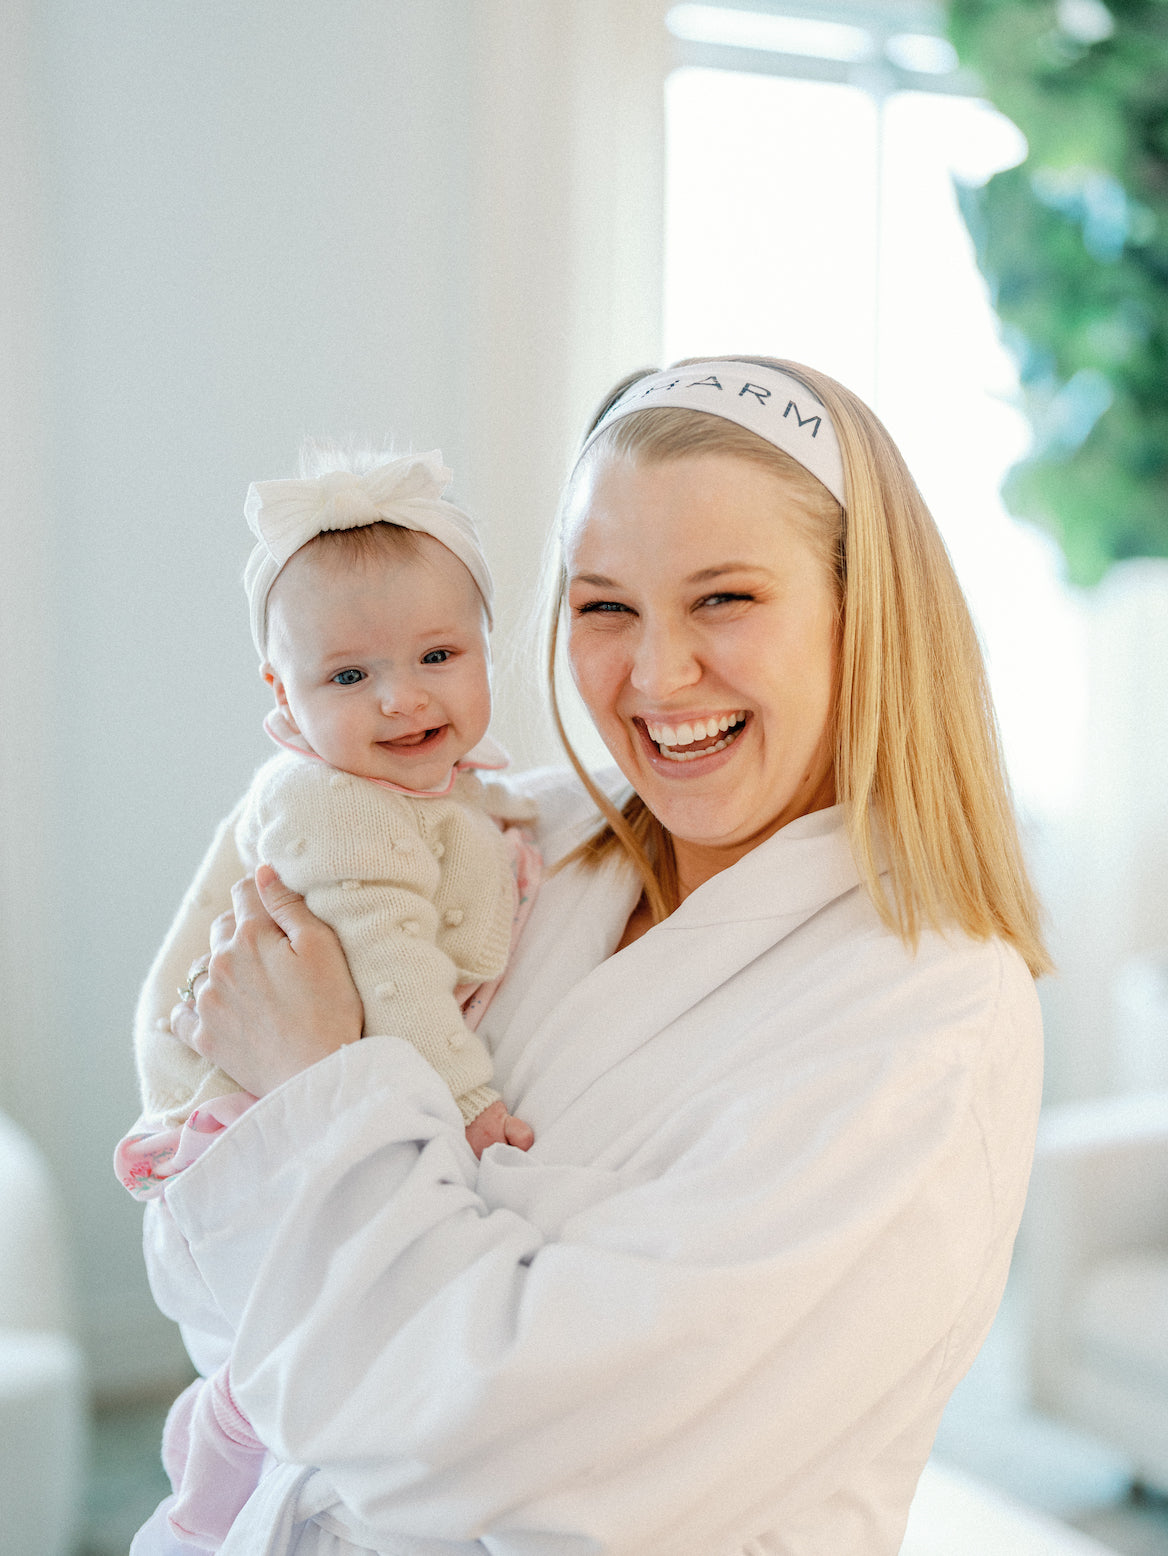 Postpartum Skin Care Guide: Everything You Need to Know